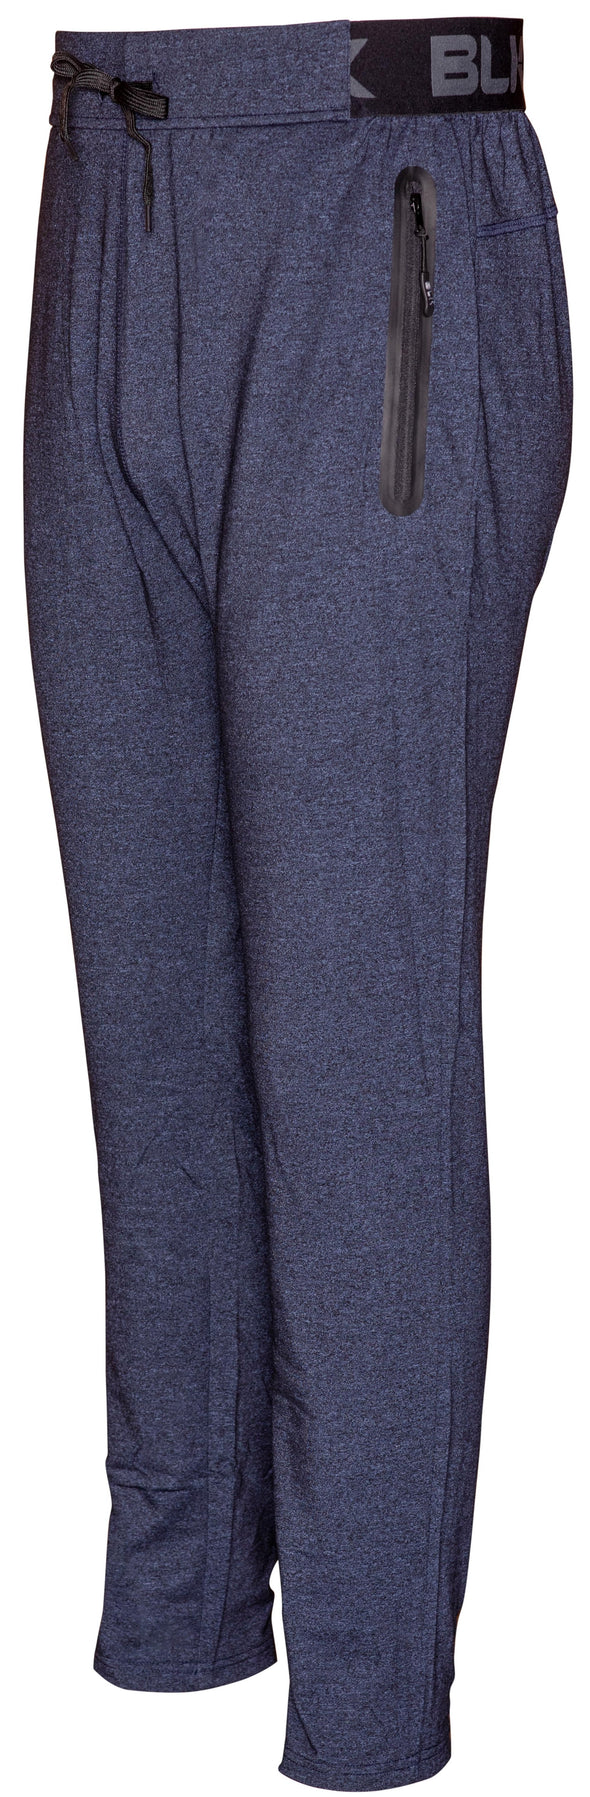 BLK Lifestyle Tapered Training Pant – Navy